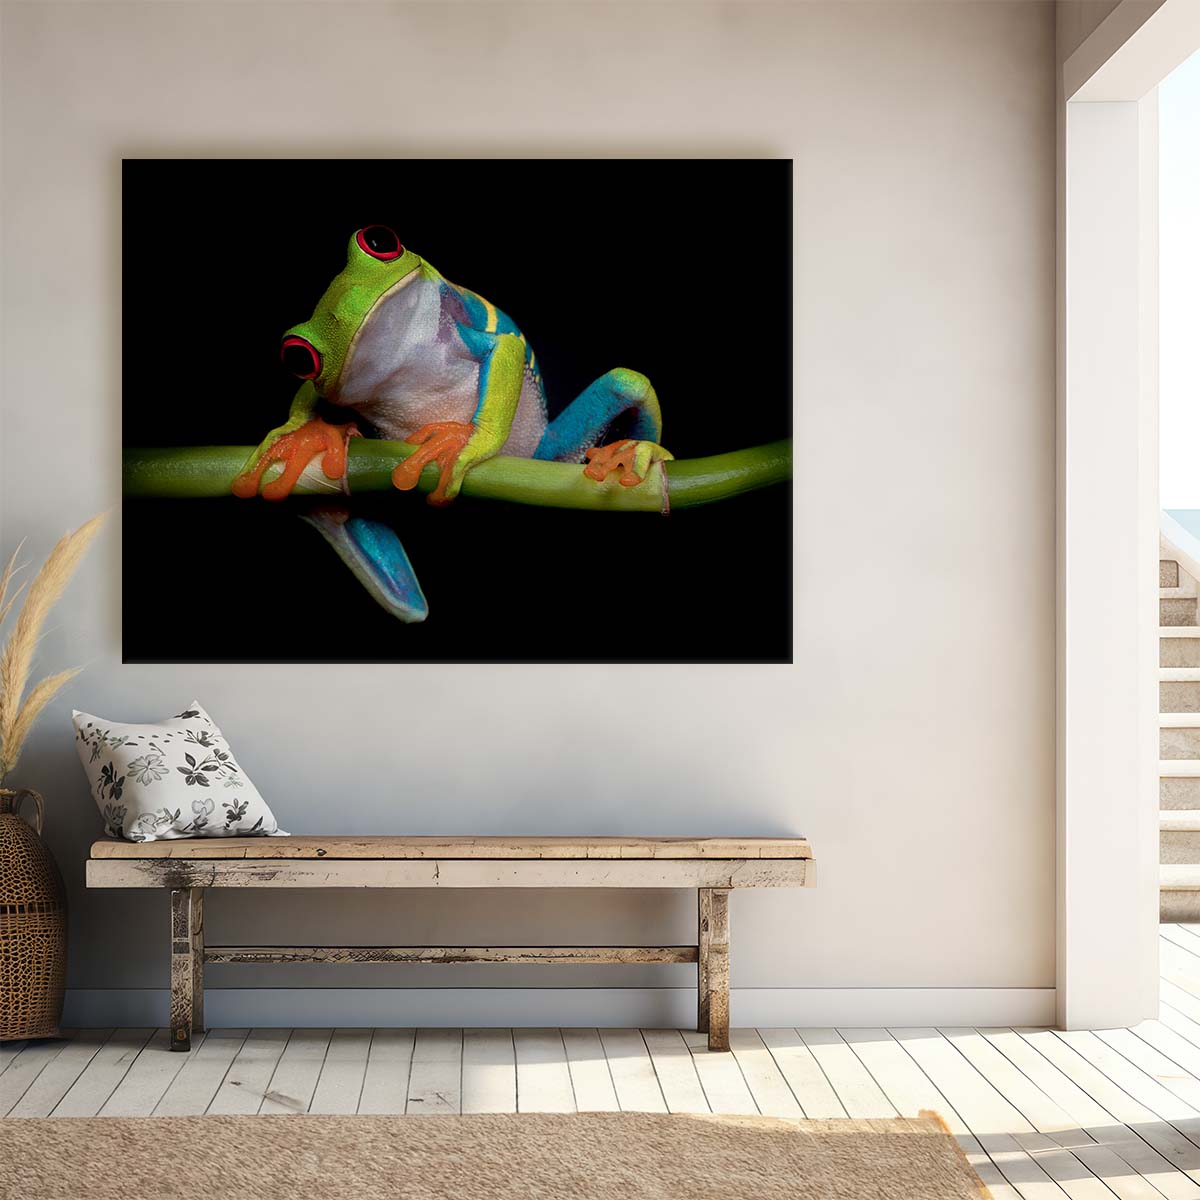 Red-Eyed Tree Frog Nocturnal Amphibian Macro Photography Wall Art